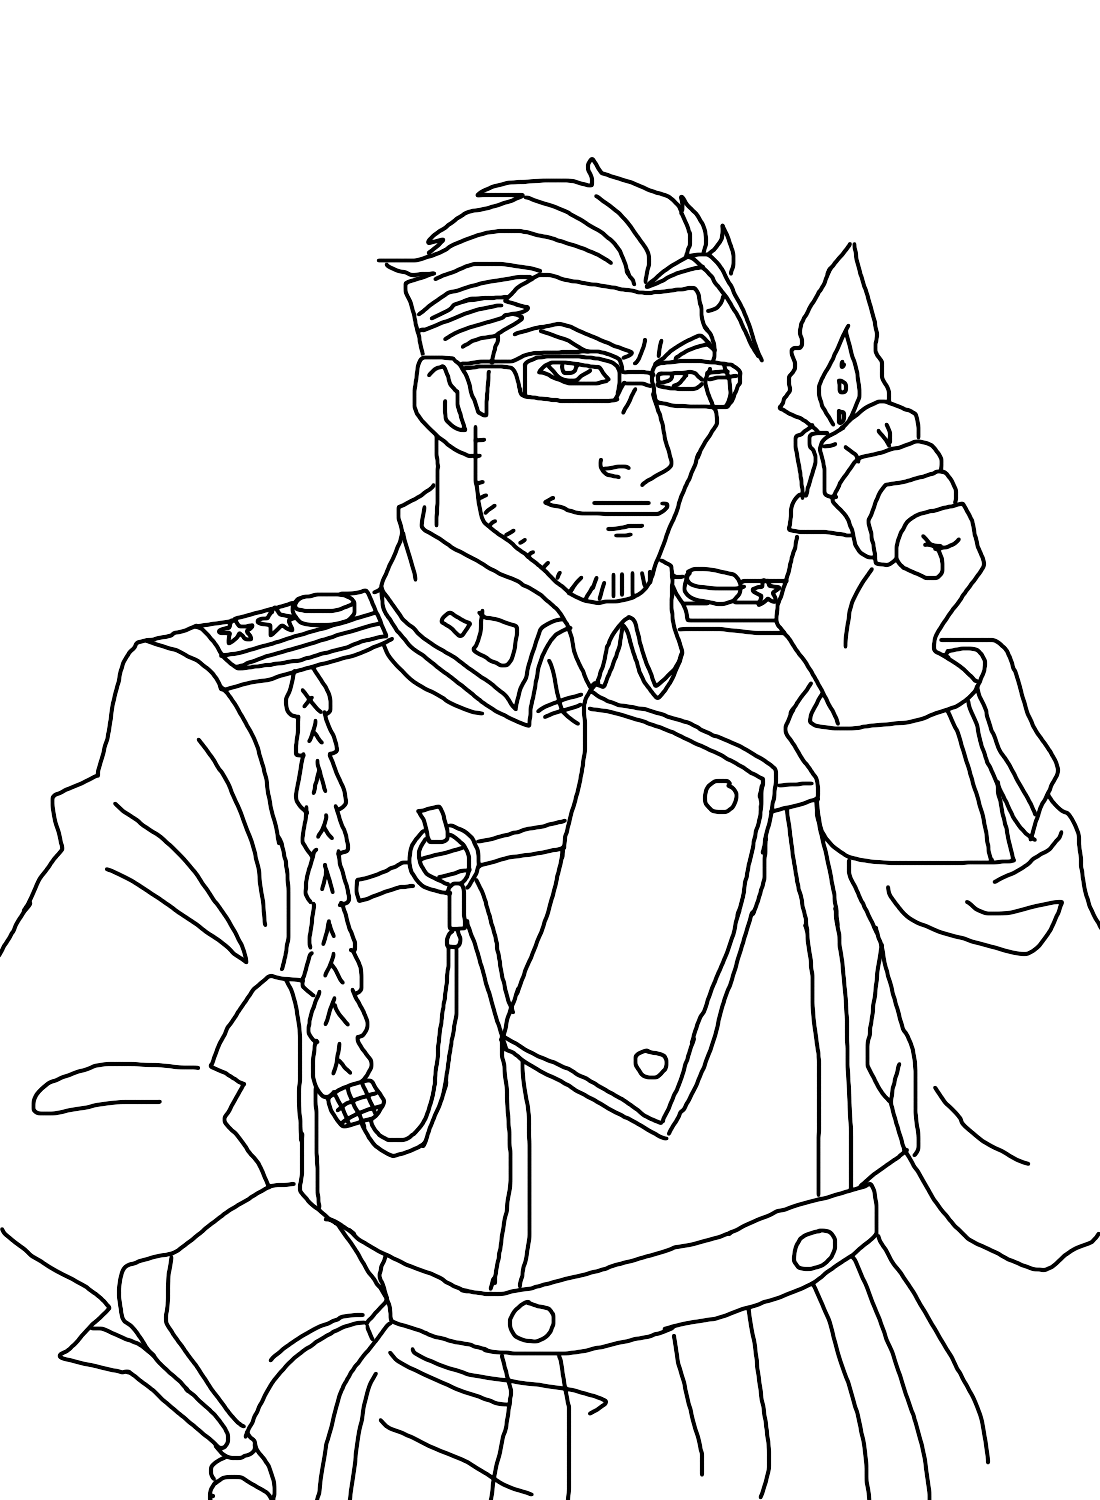 Coloring Page Maes Hughes from Maes Hughes